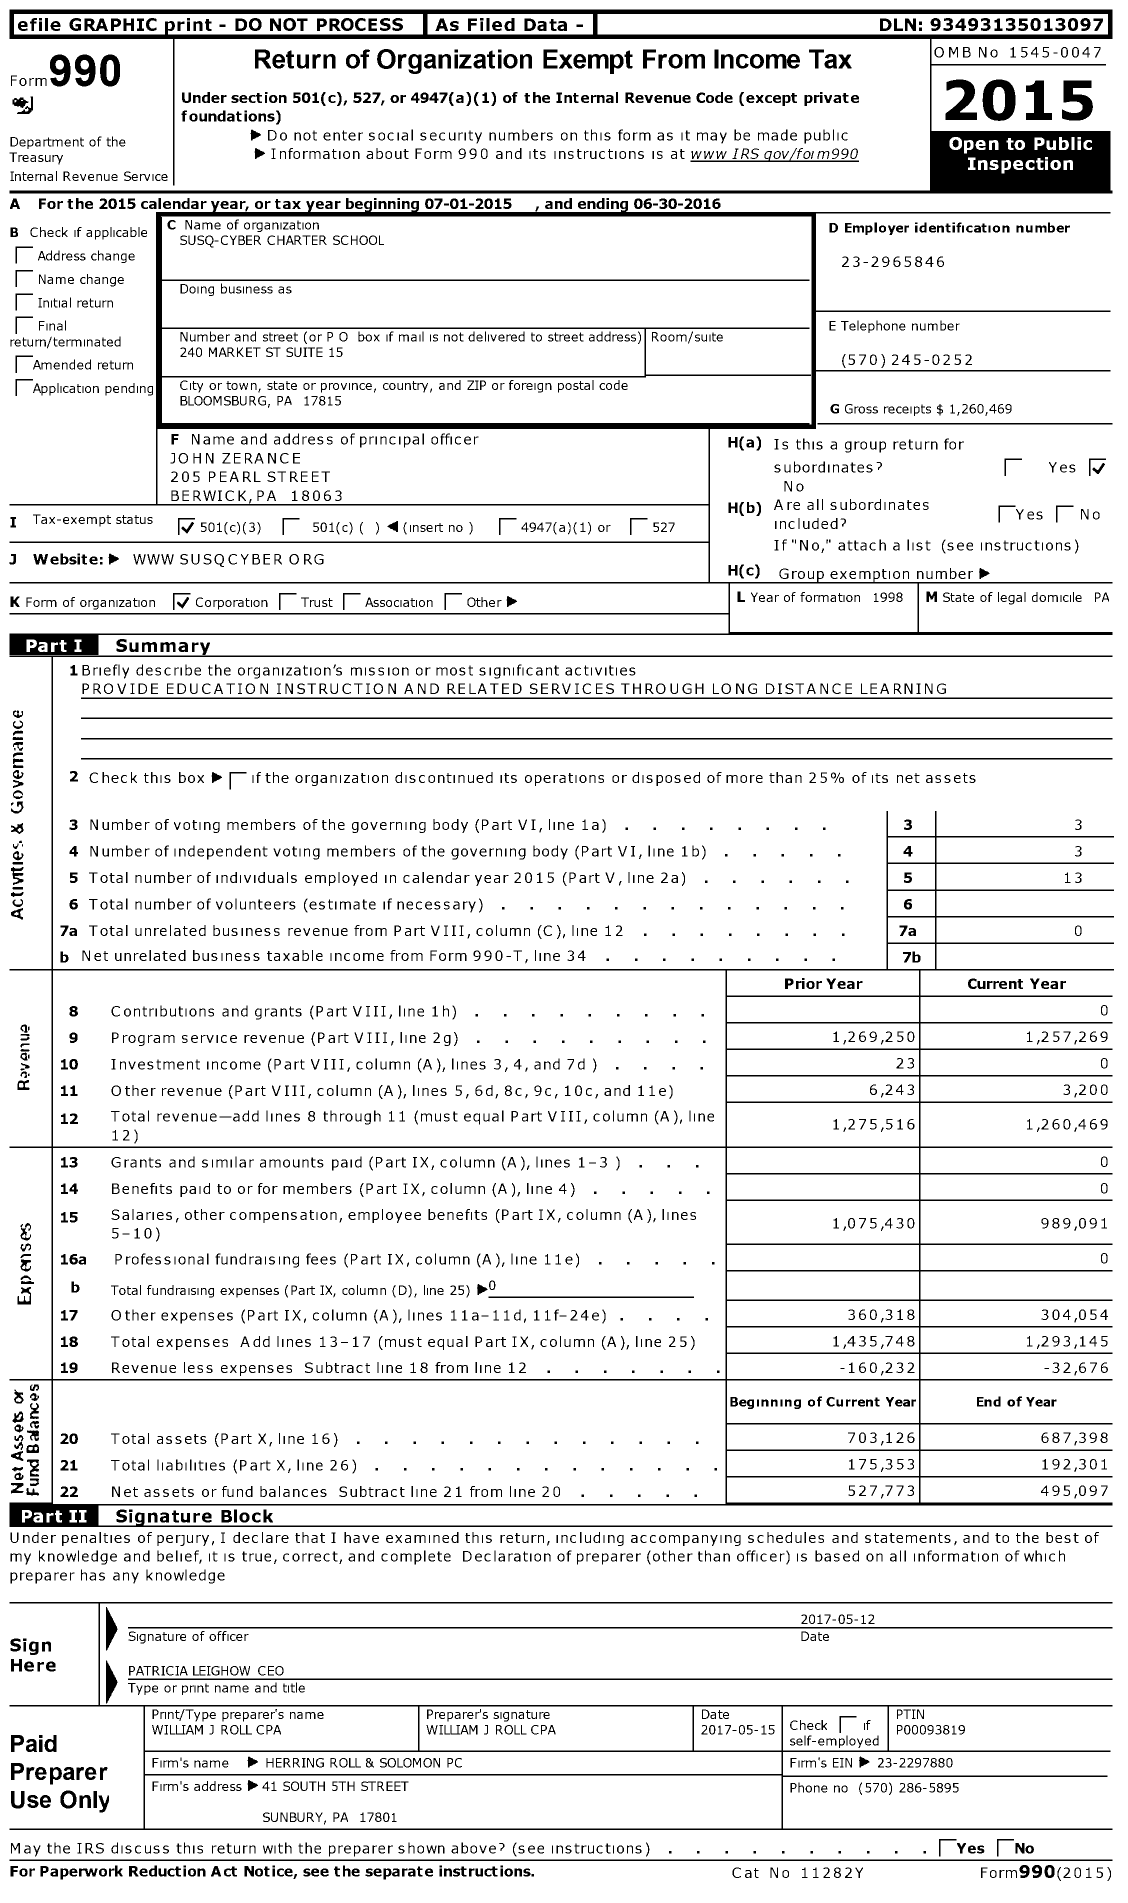 Image of first page of 2015 Form 990 for Susq-Cyber Charter School